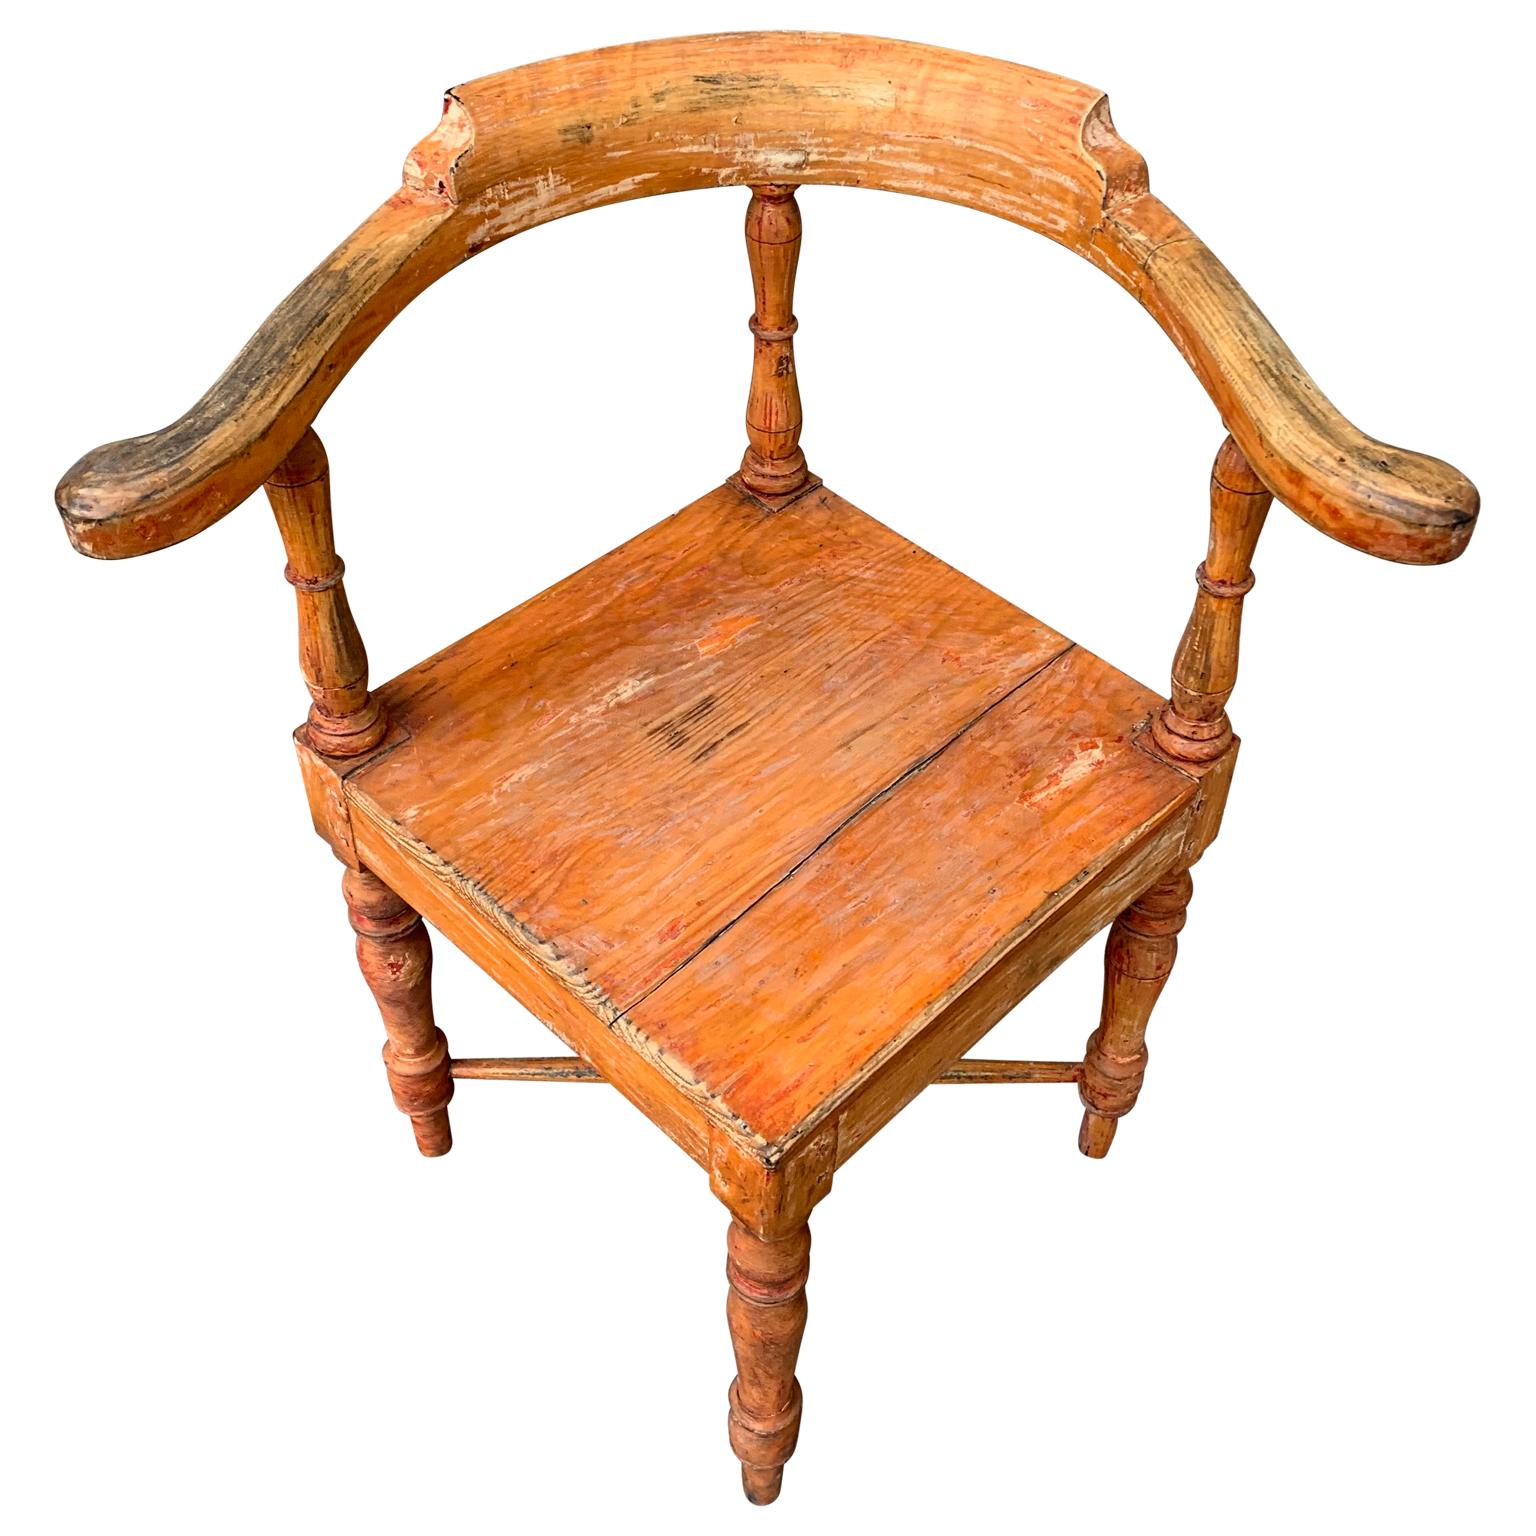 An 19th century Gustavian Folk Art corner armchair from the typical Swedish folk art category furniture. This armchair has been professionally restored, scraped to its original orange paint and patina.

 